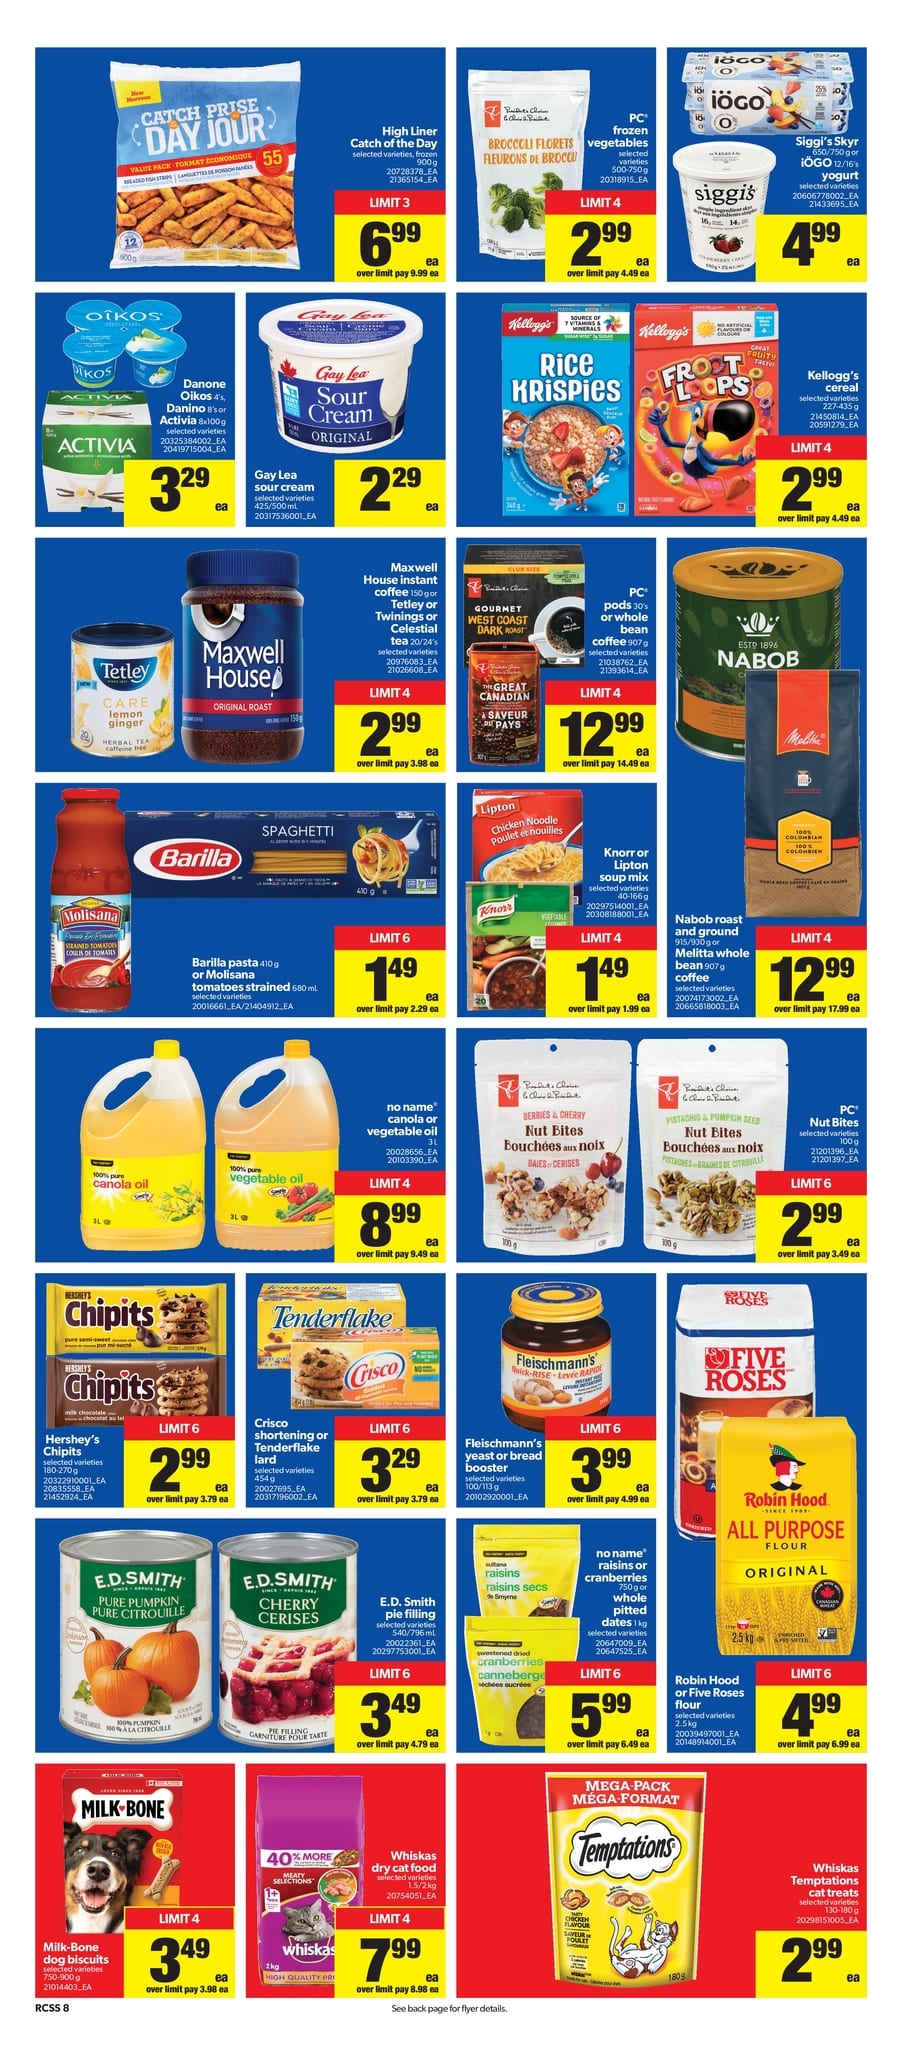 Real Canadian Superstore Ontario - Weekly Flyer Specials - Page 9